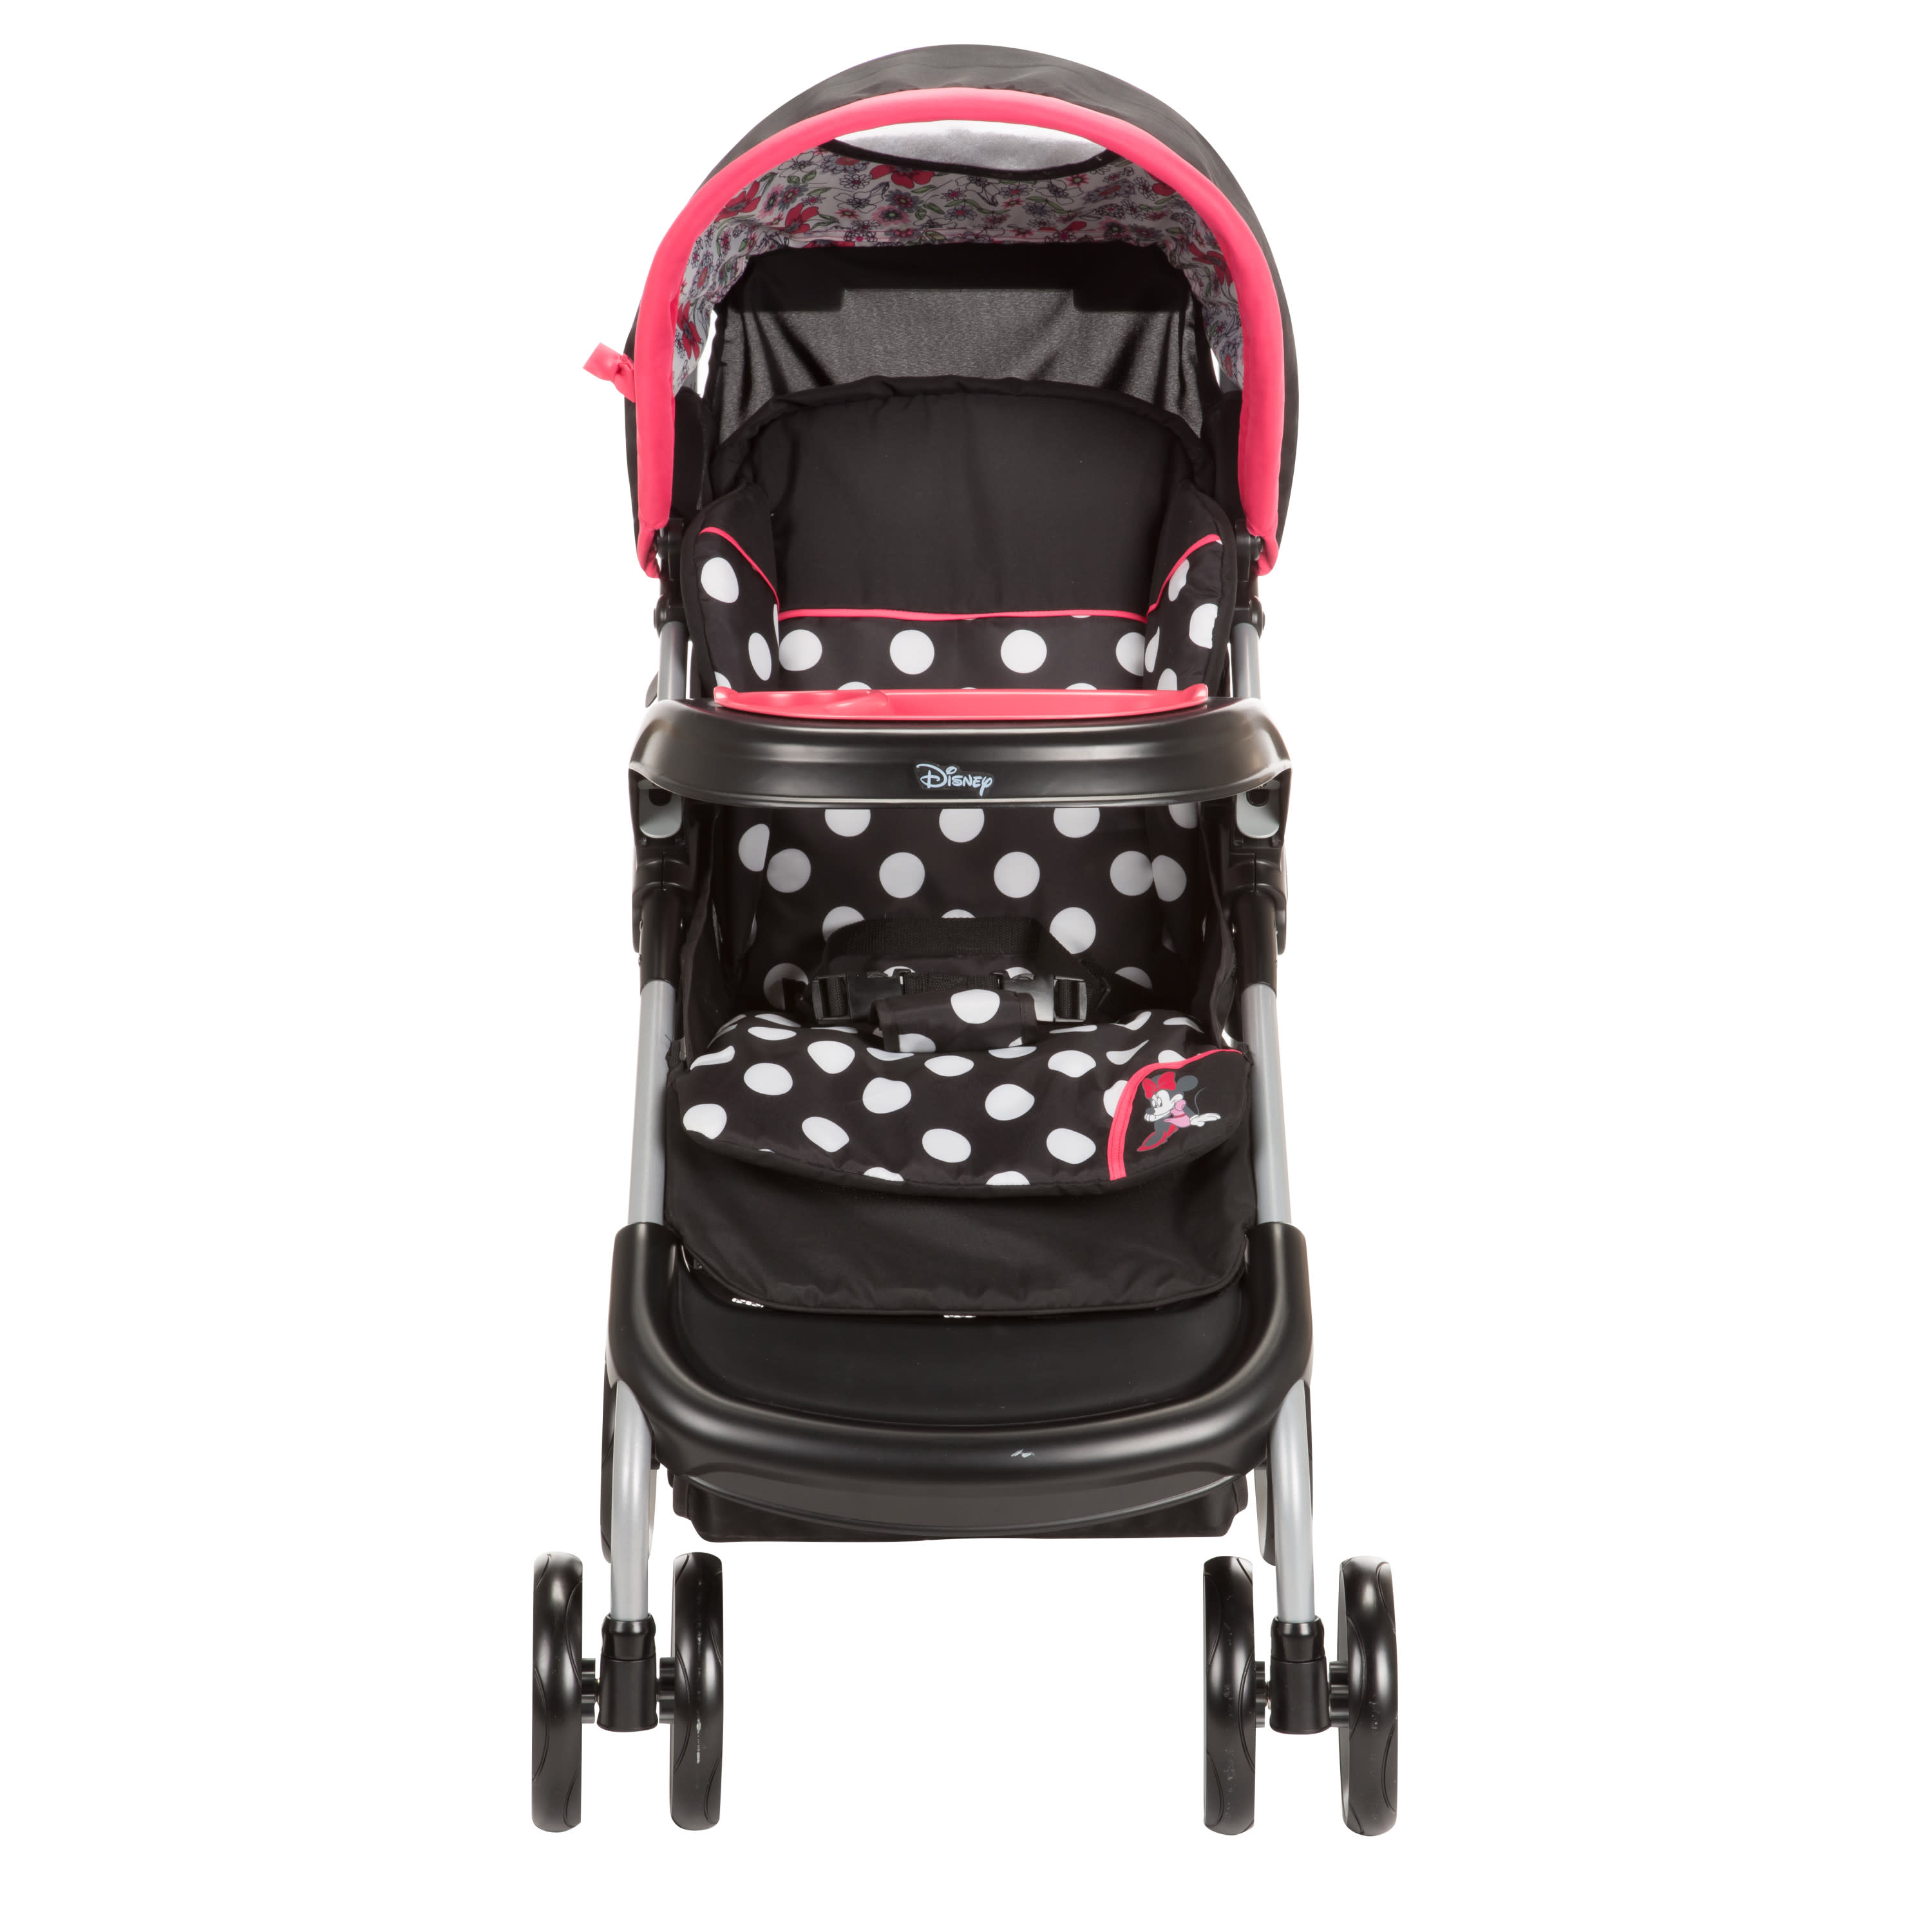 Disney Baby Lift & Stroll Plus Travel System, Minnie Coral Flowers - image 3 of 18